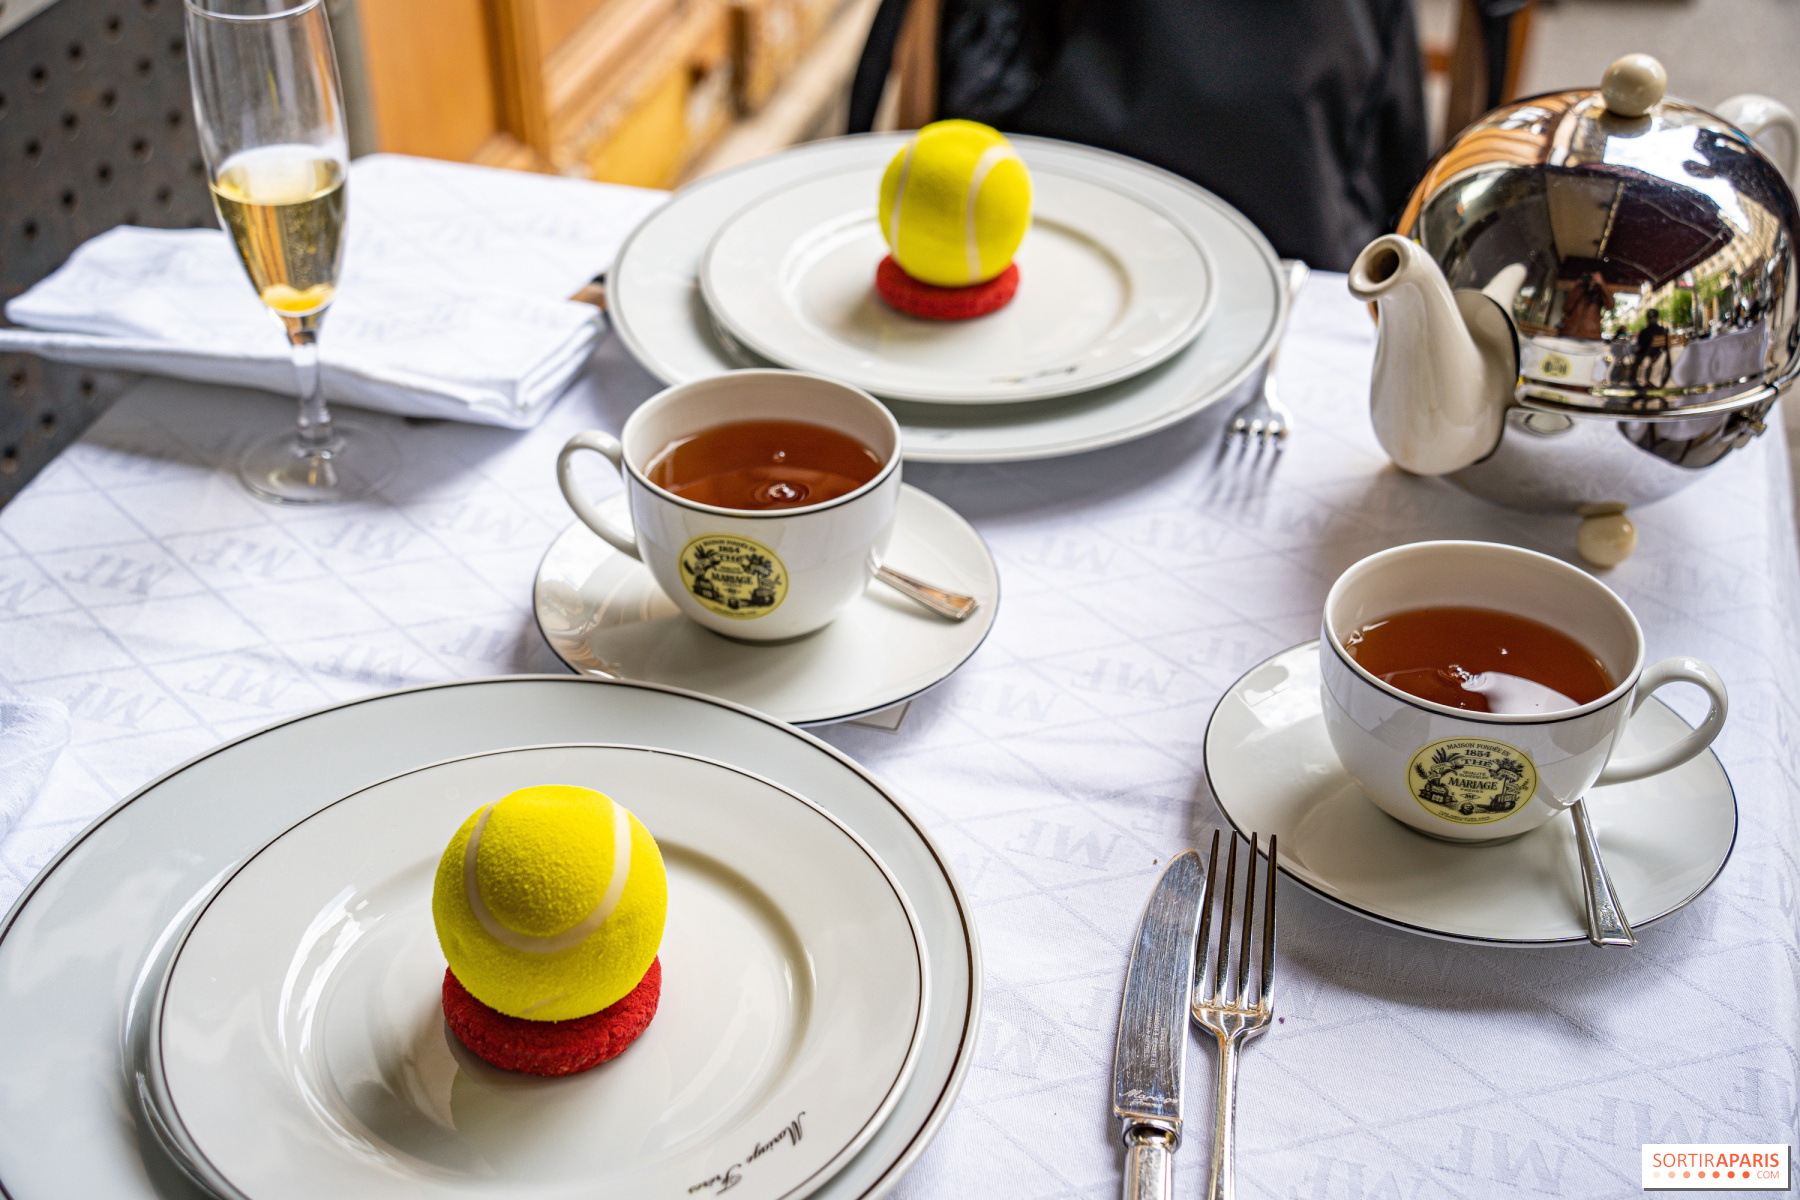 MARIAGE FRÈRES - French Tea in Paris since 1854